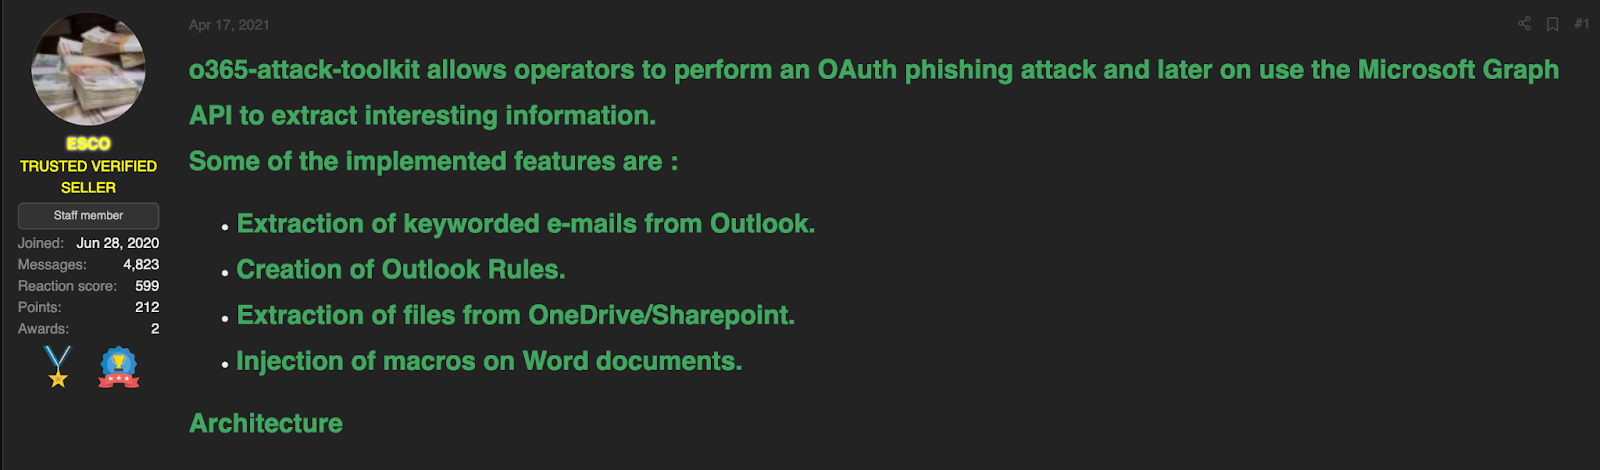 Top 6 Most Notorious OAuth Attacks